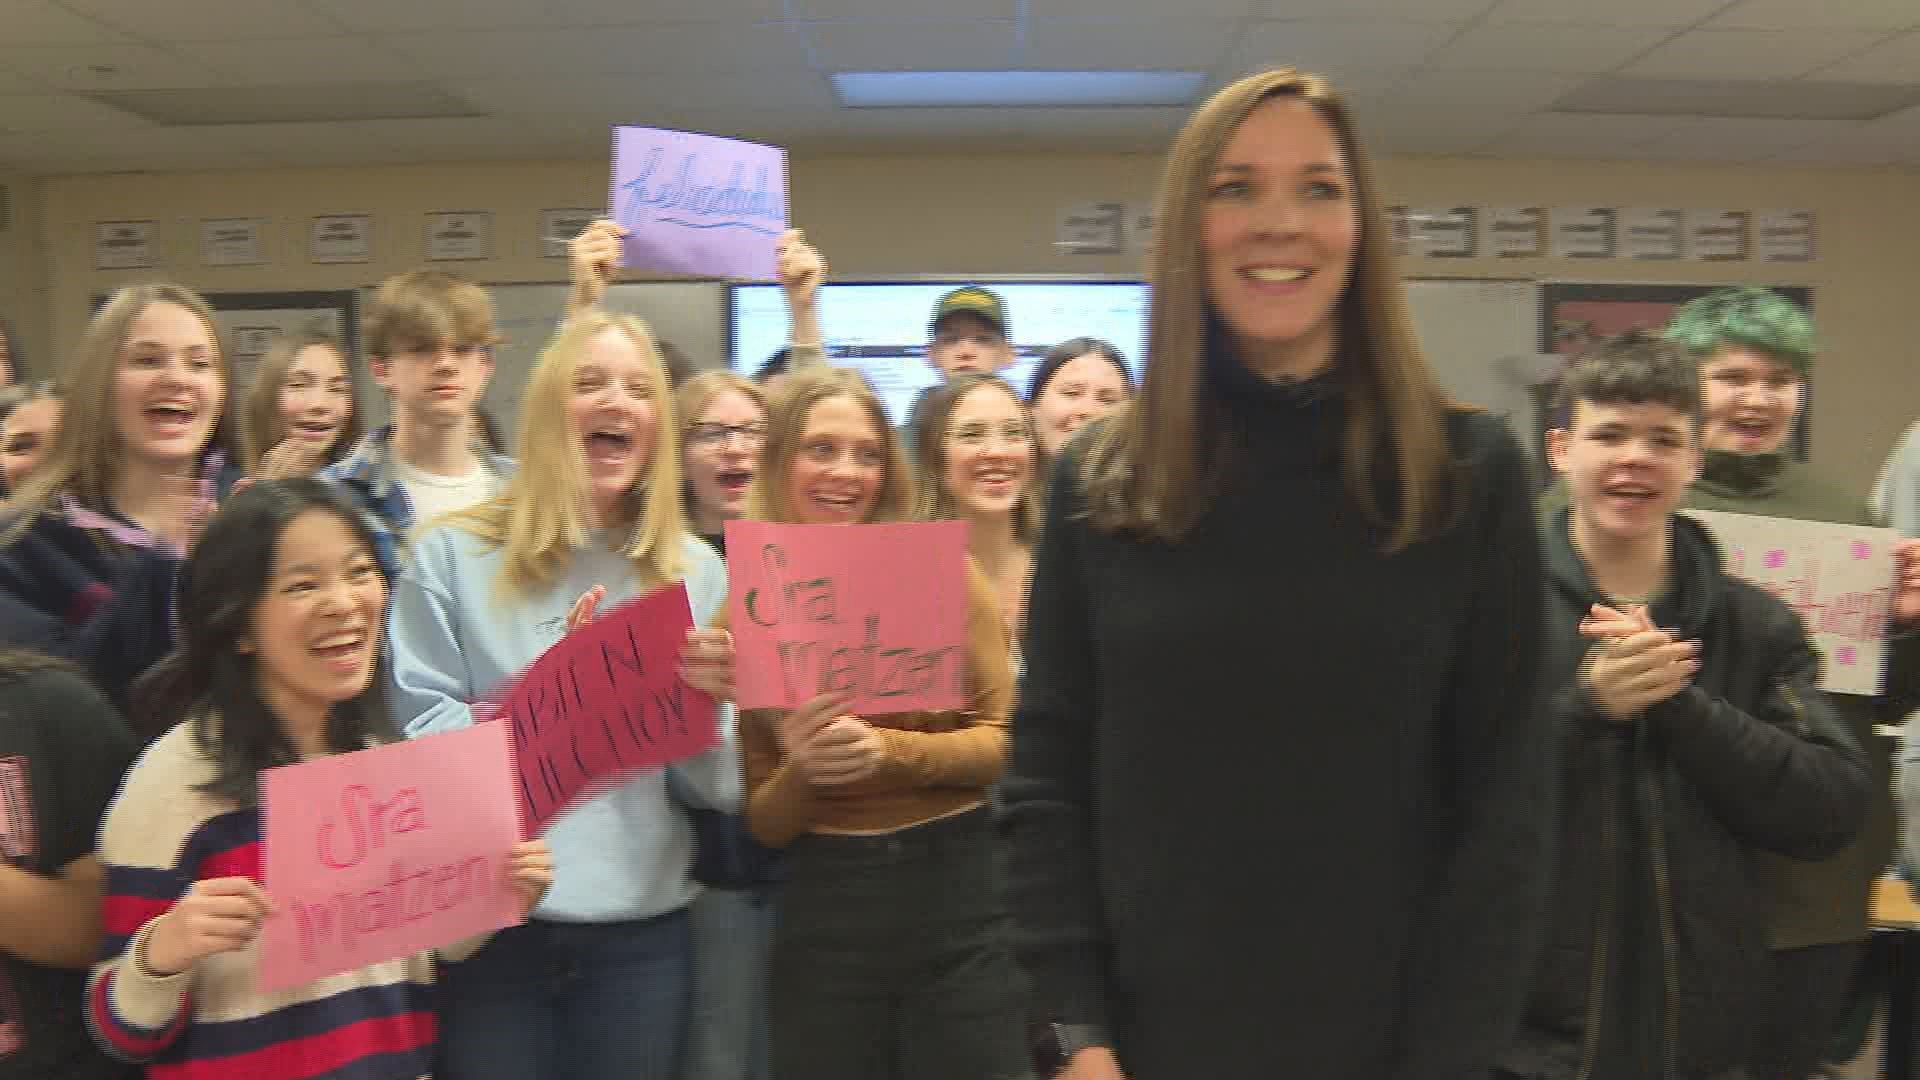 Students surprised our next Teacher of the Week in a different language. Luckily, she knew exactly what they said.